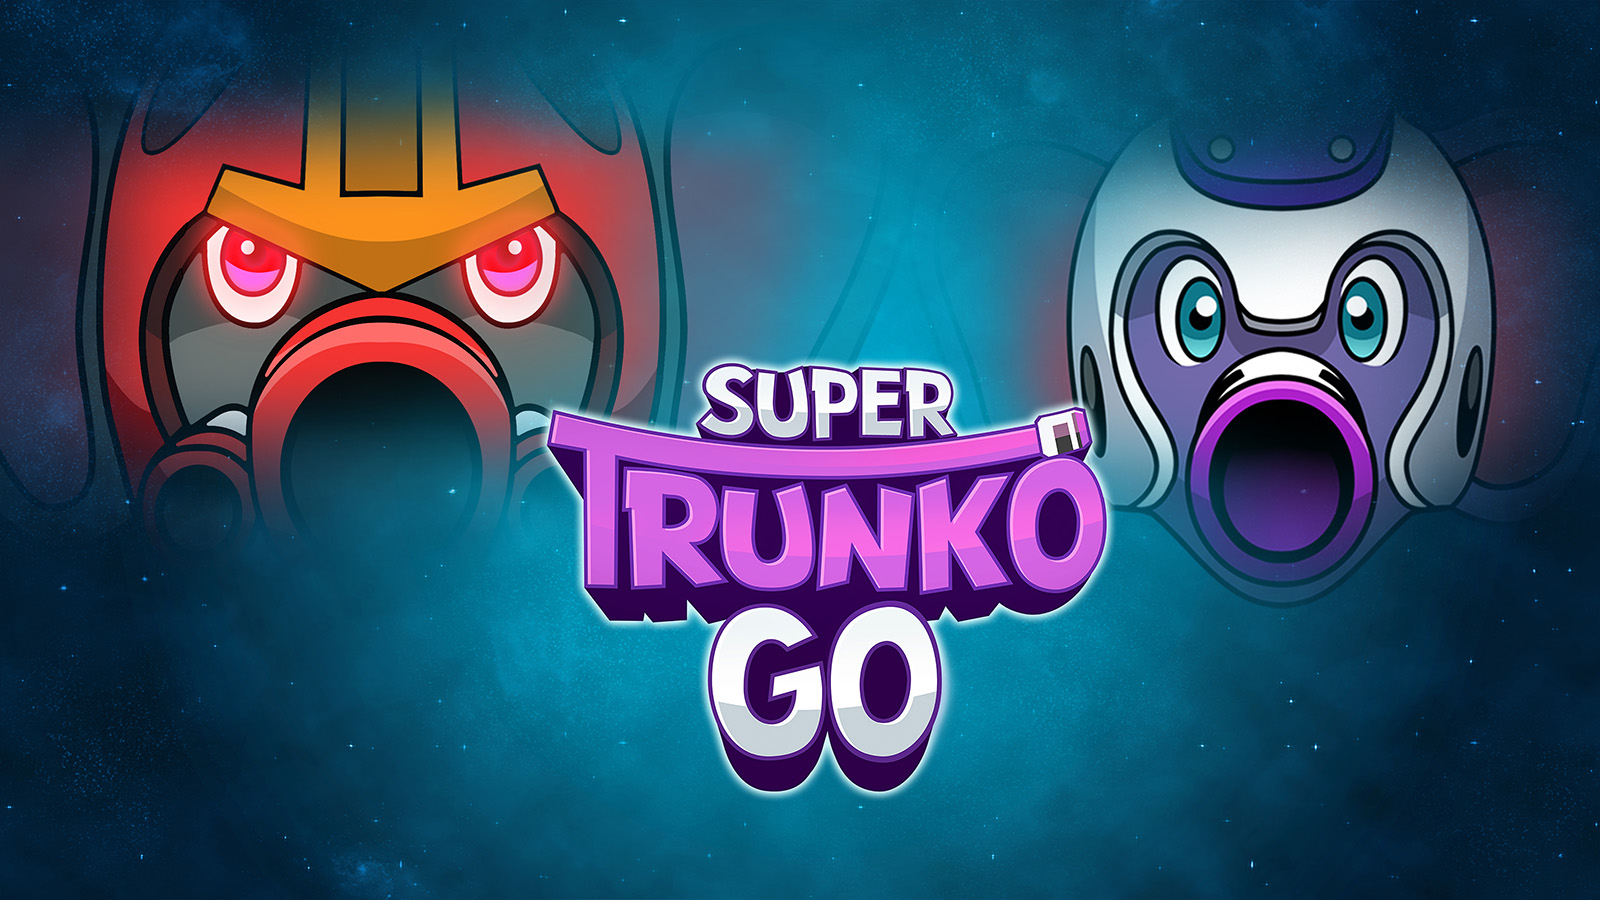 Super Trunko Go Is A Challenging Twin-Stick Shooter Launching In 2023